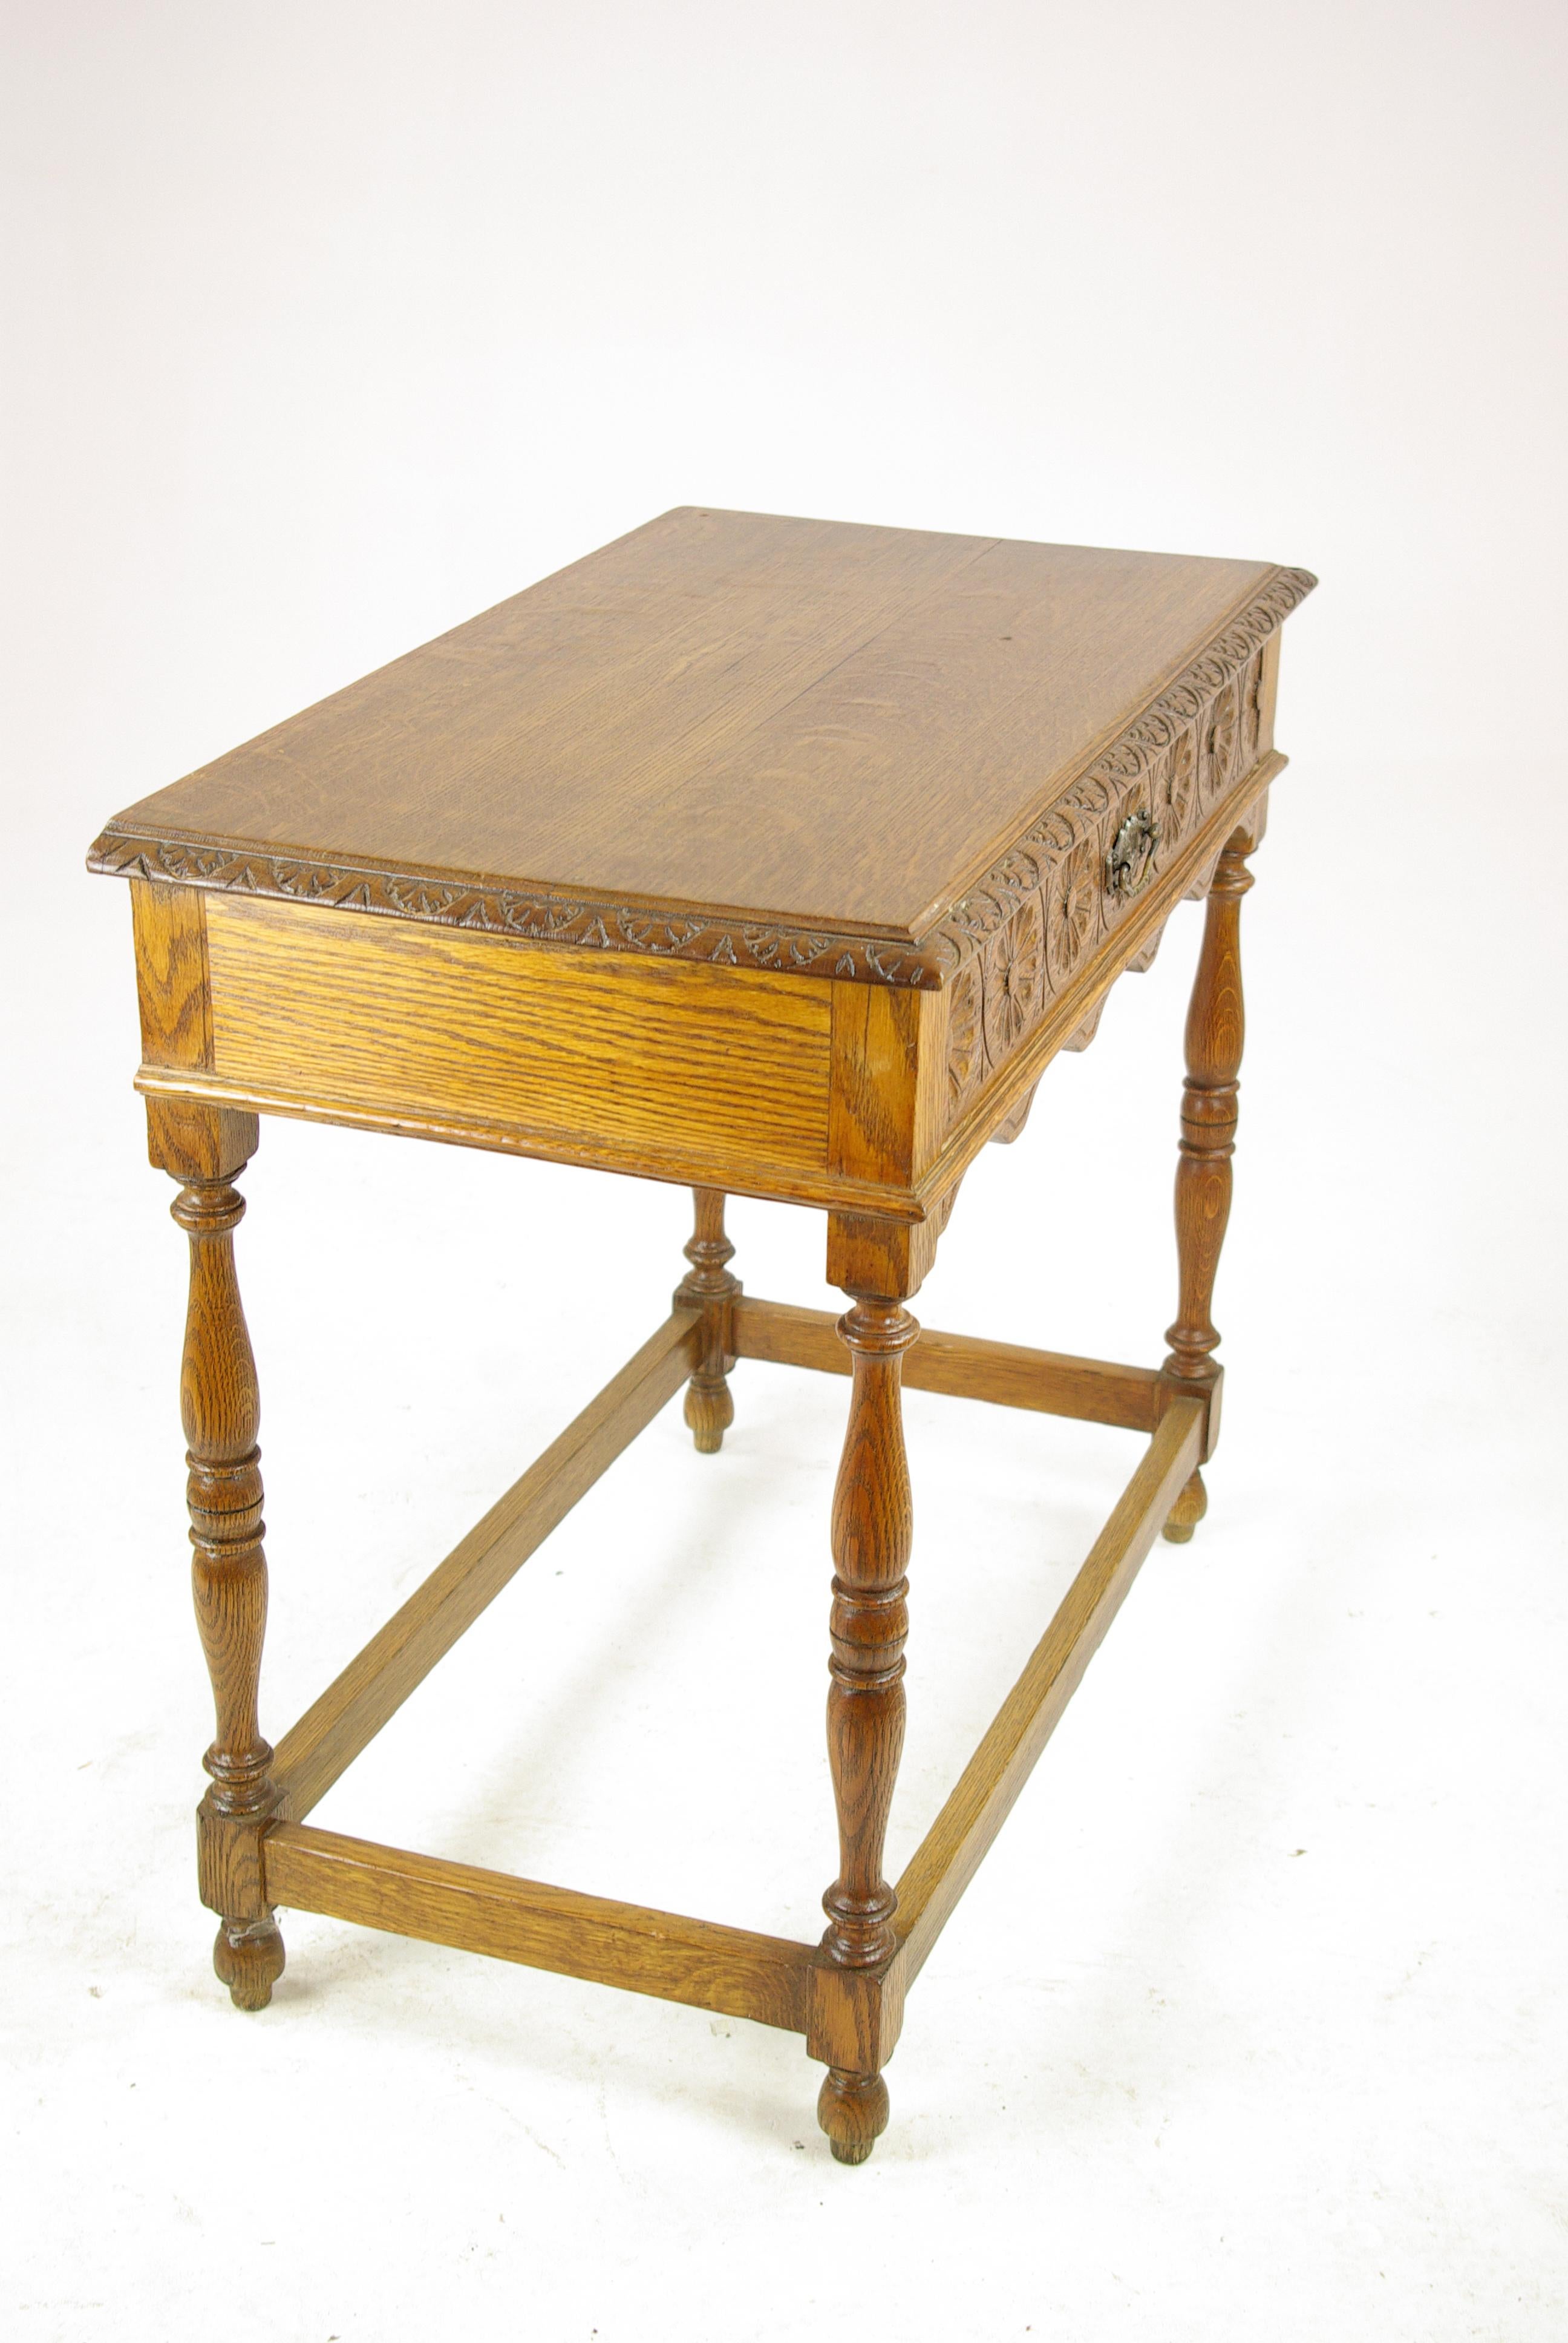 Antique oak table, carved tiger oak hall table, antique long table, antique end table, Scotland 1910s, H518

Scotland, 1910s
Solid oak constructions with original finish
Tiger oak top with carved edge around the perimeter
Single carved dovetailed